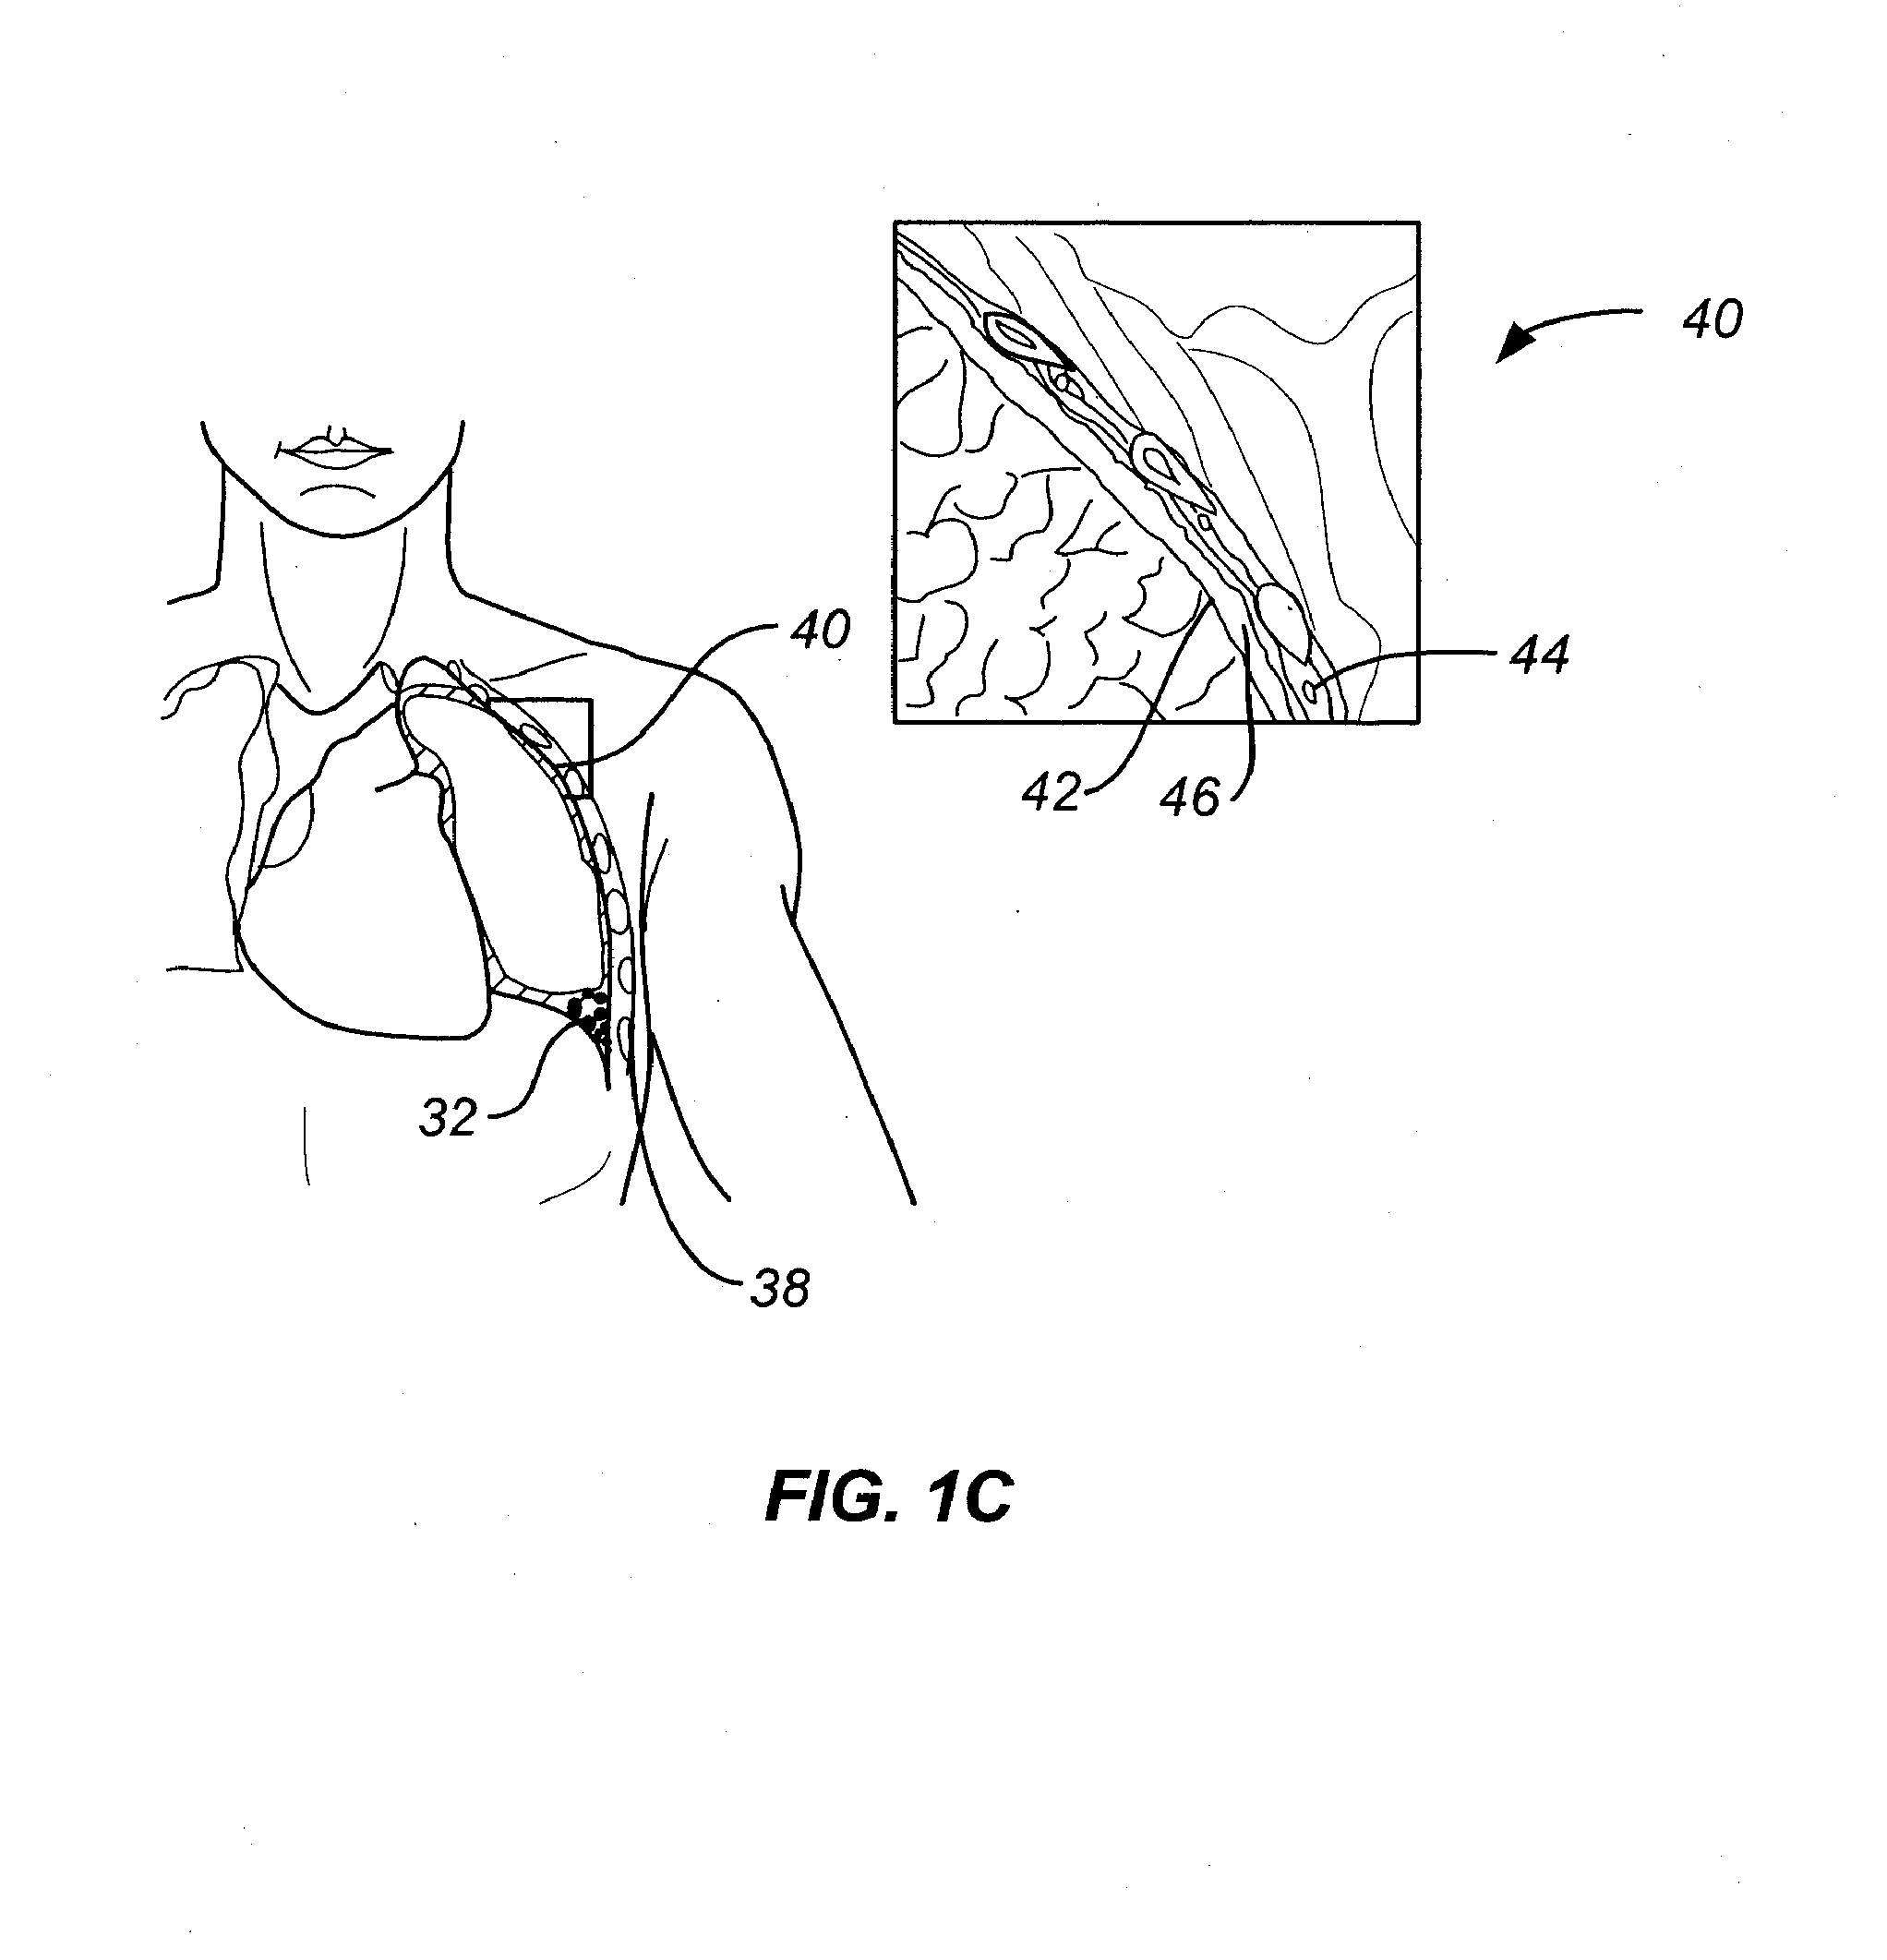 Minimally invasive lung volume reduction device and method